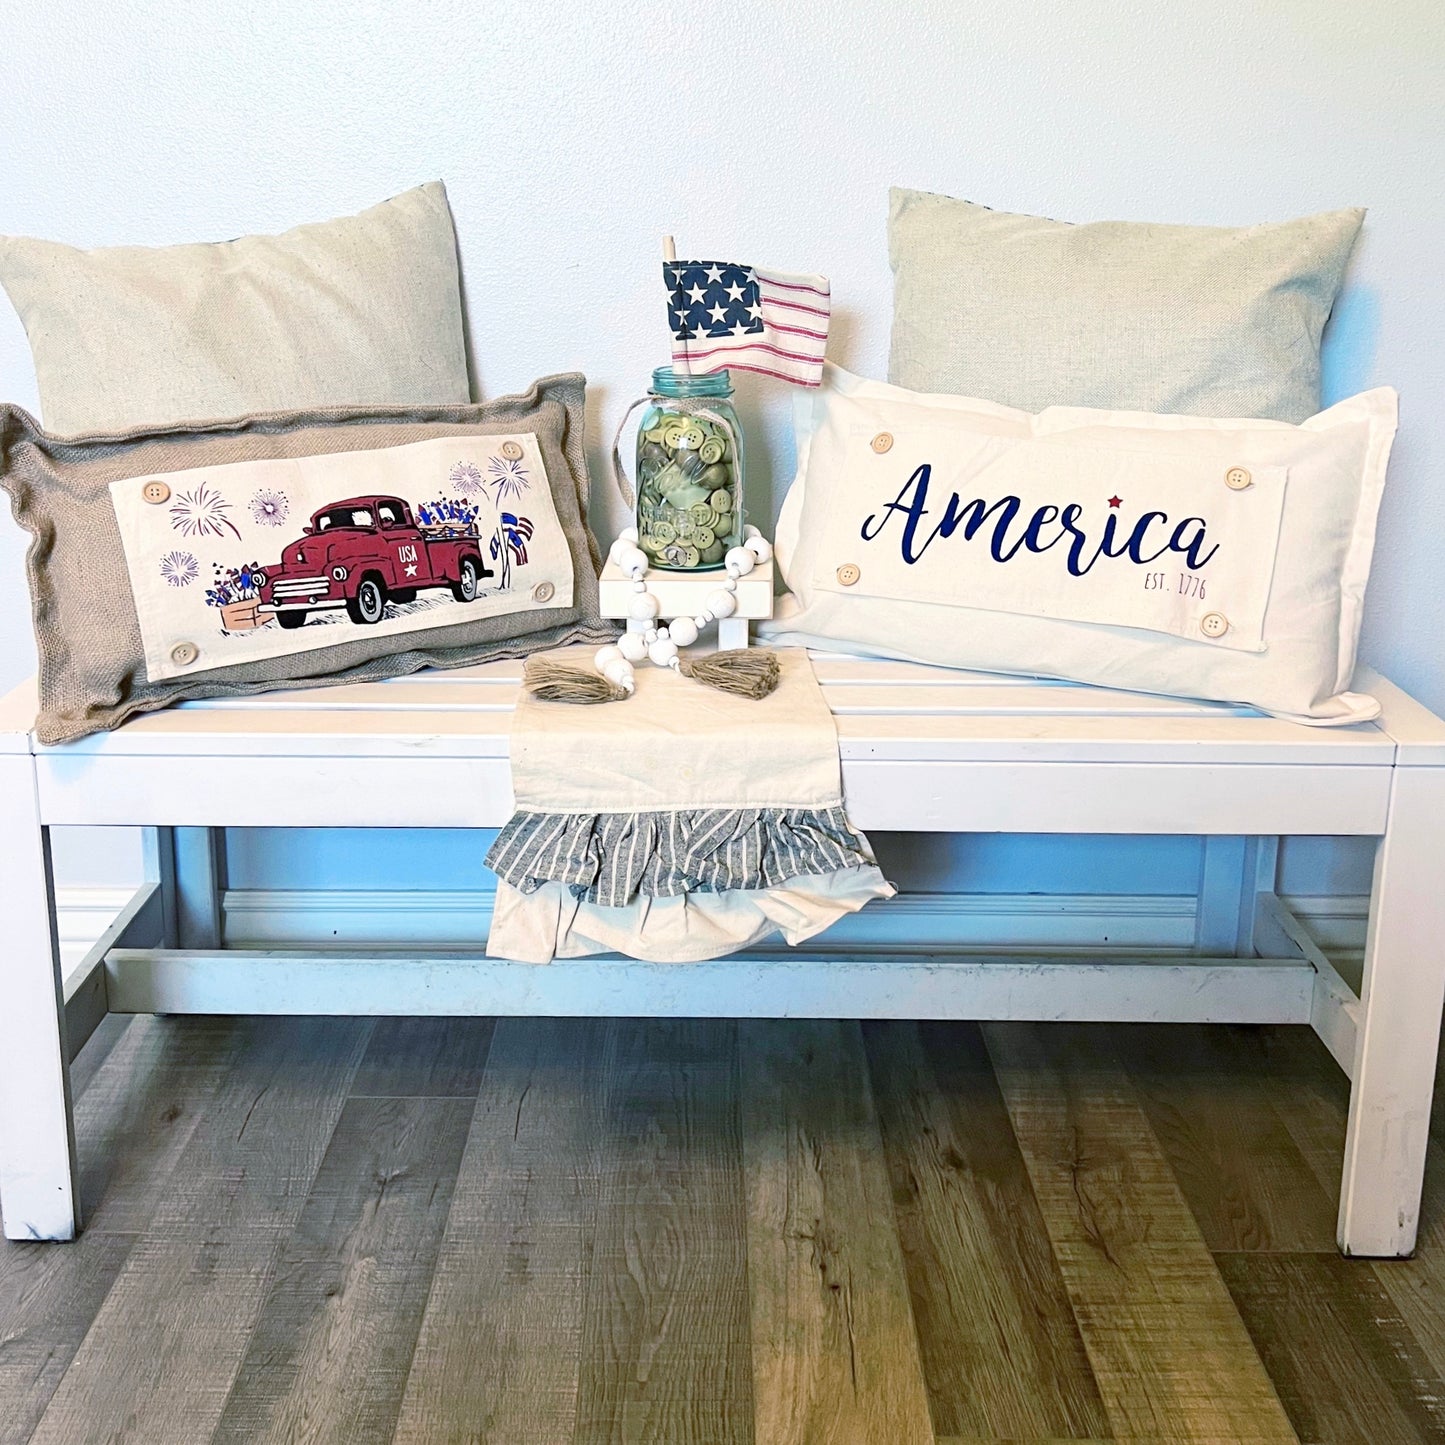 BUNDLE DEAL: Glitter Fourth 4th Of July Panels (4 pack) SAVE!!!: Firework Truck / Old Glory / America / God Bless USA